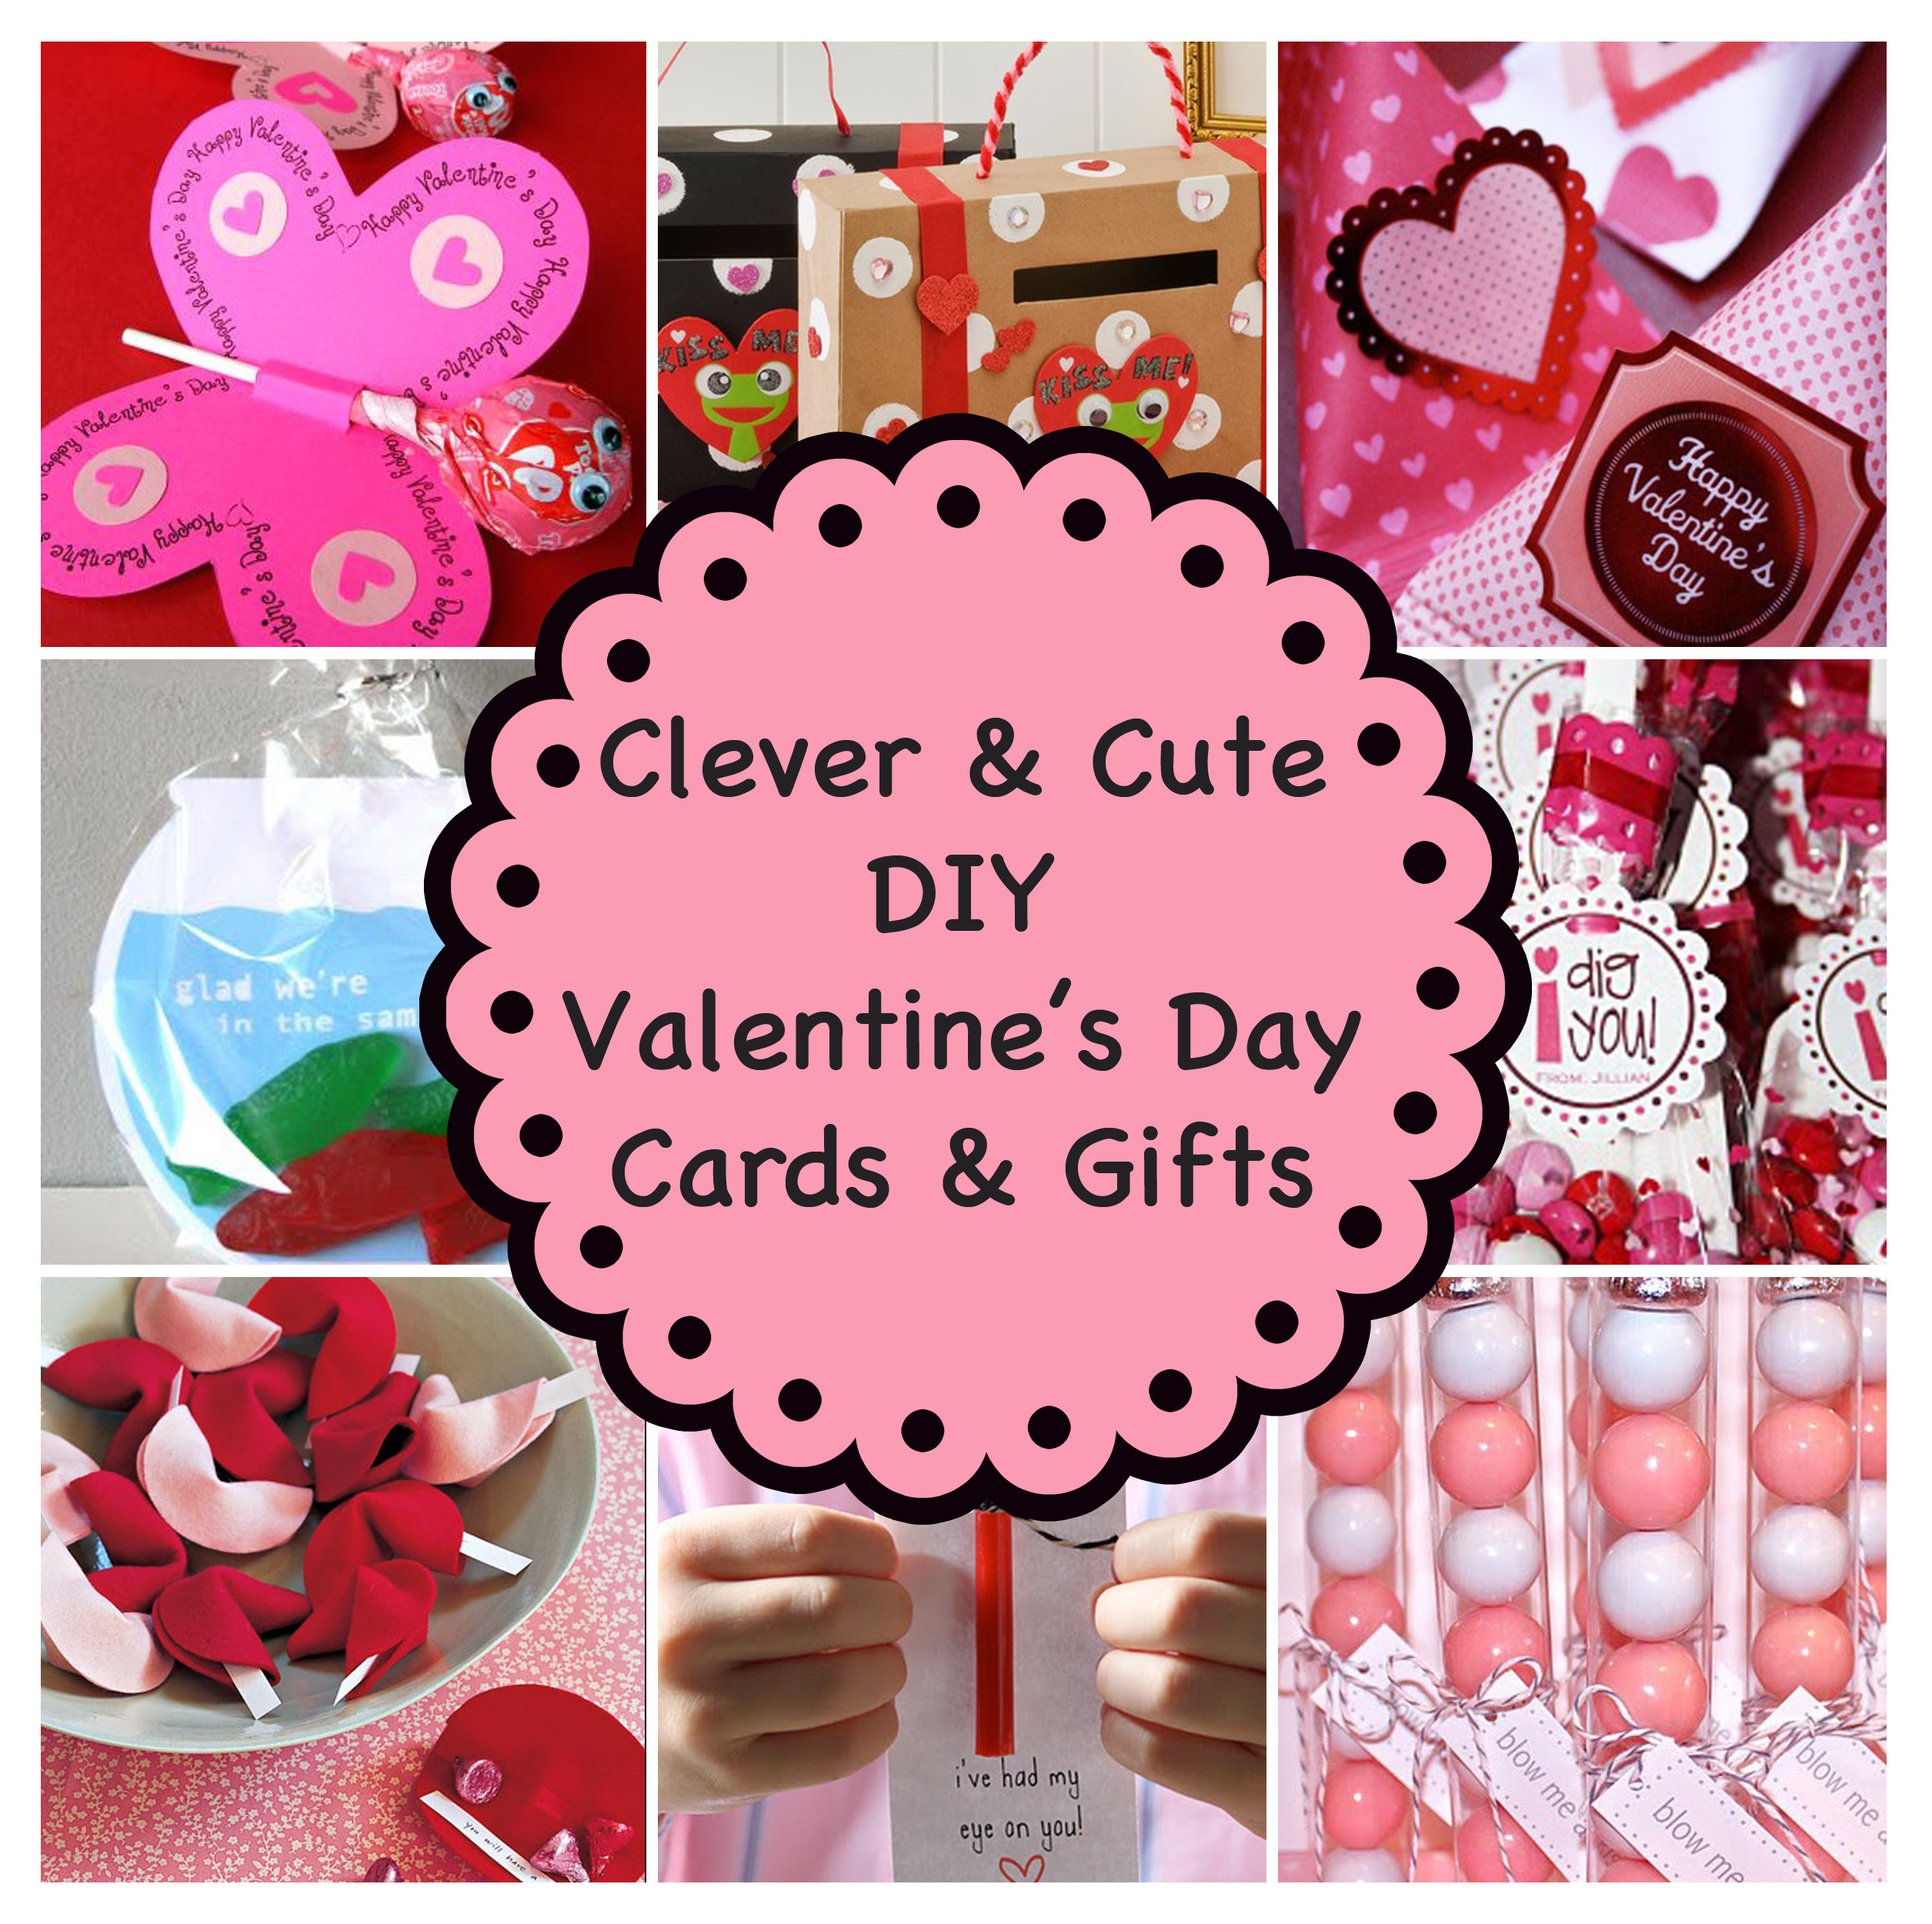 DIY Valentines Day Cards For Kids
 Clever and Cute DIY Valentine’s Day Cards & Gifts